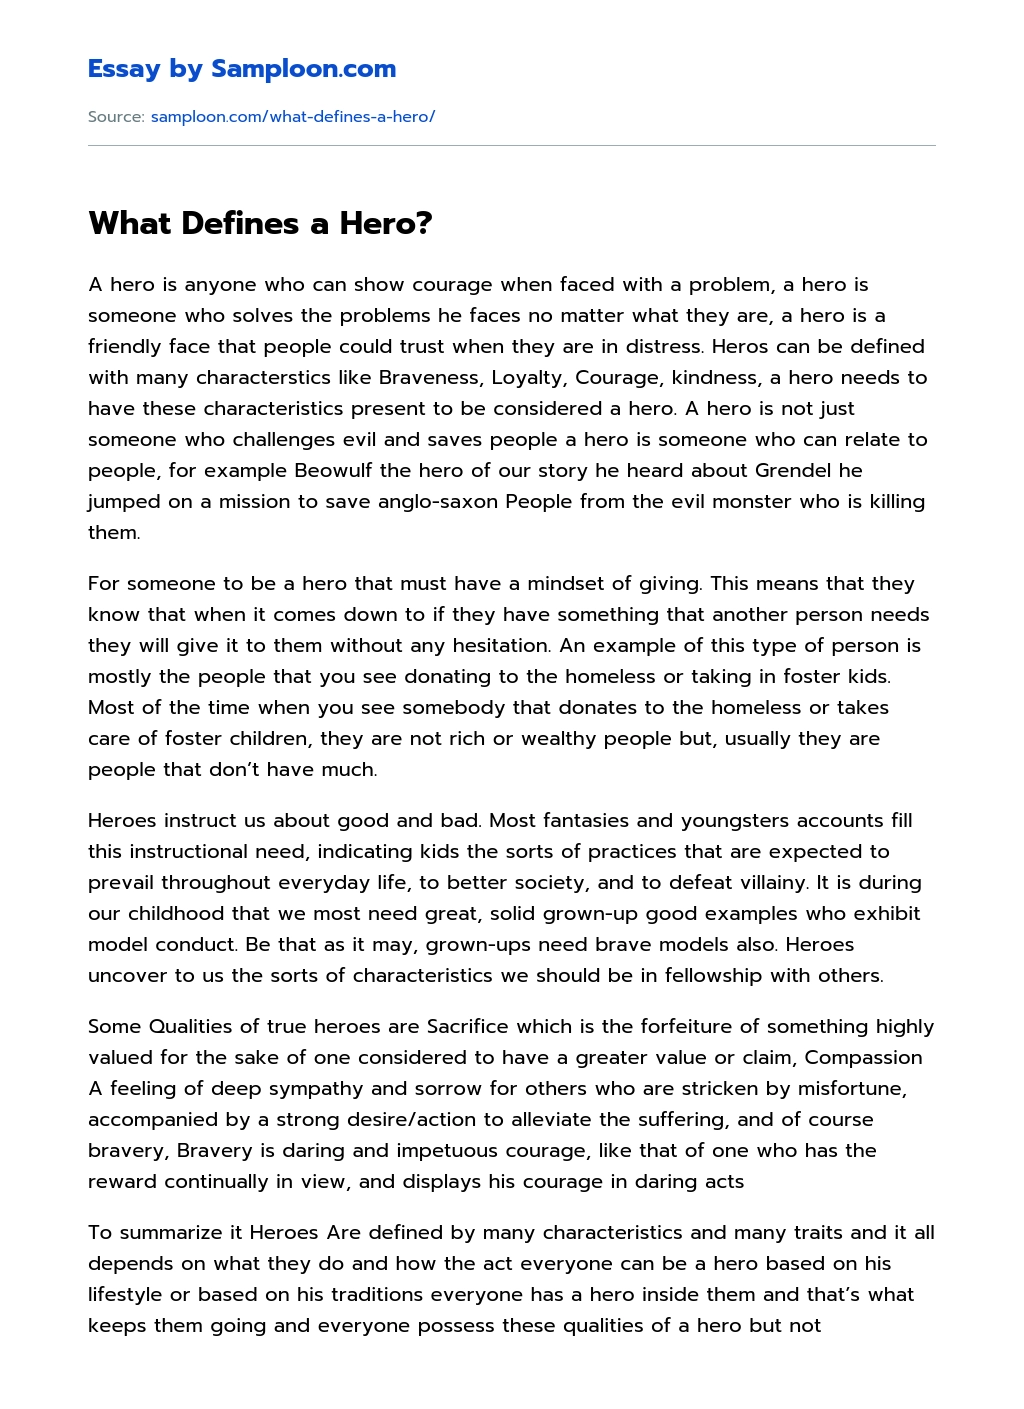 What Defines a Hero? essay